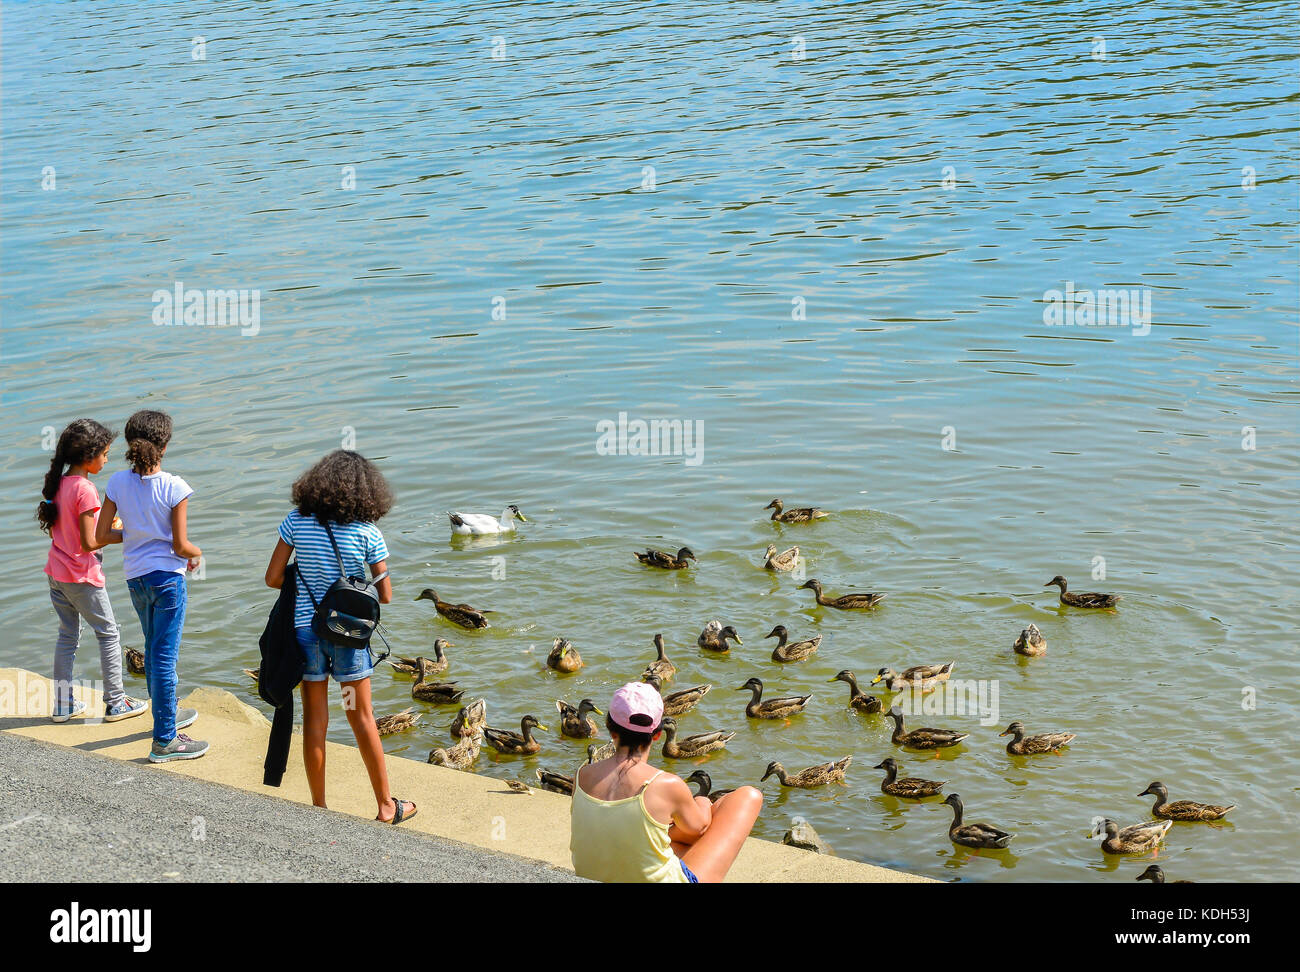 On the bank of the Potomac River, three girls of color enjoy feeding ducks while an adult woman looks on near Washington Harbor in Georgetown, Washing Stock Photo